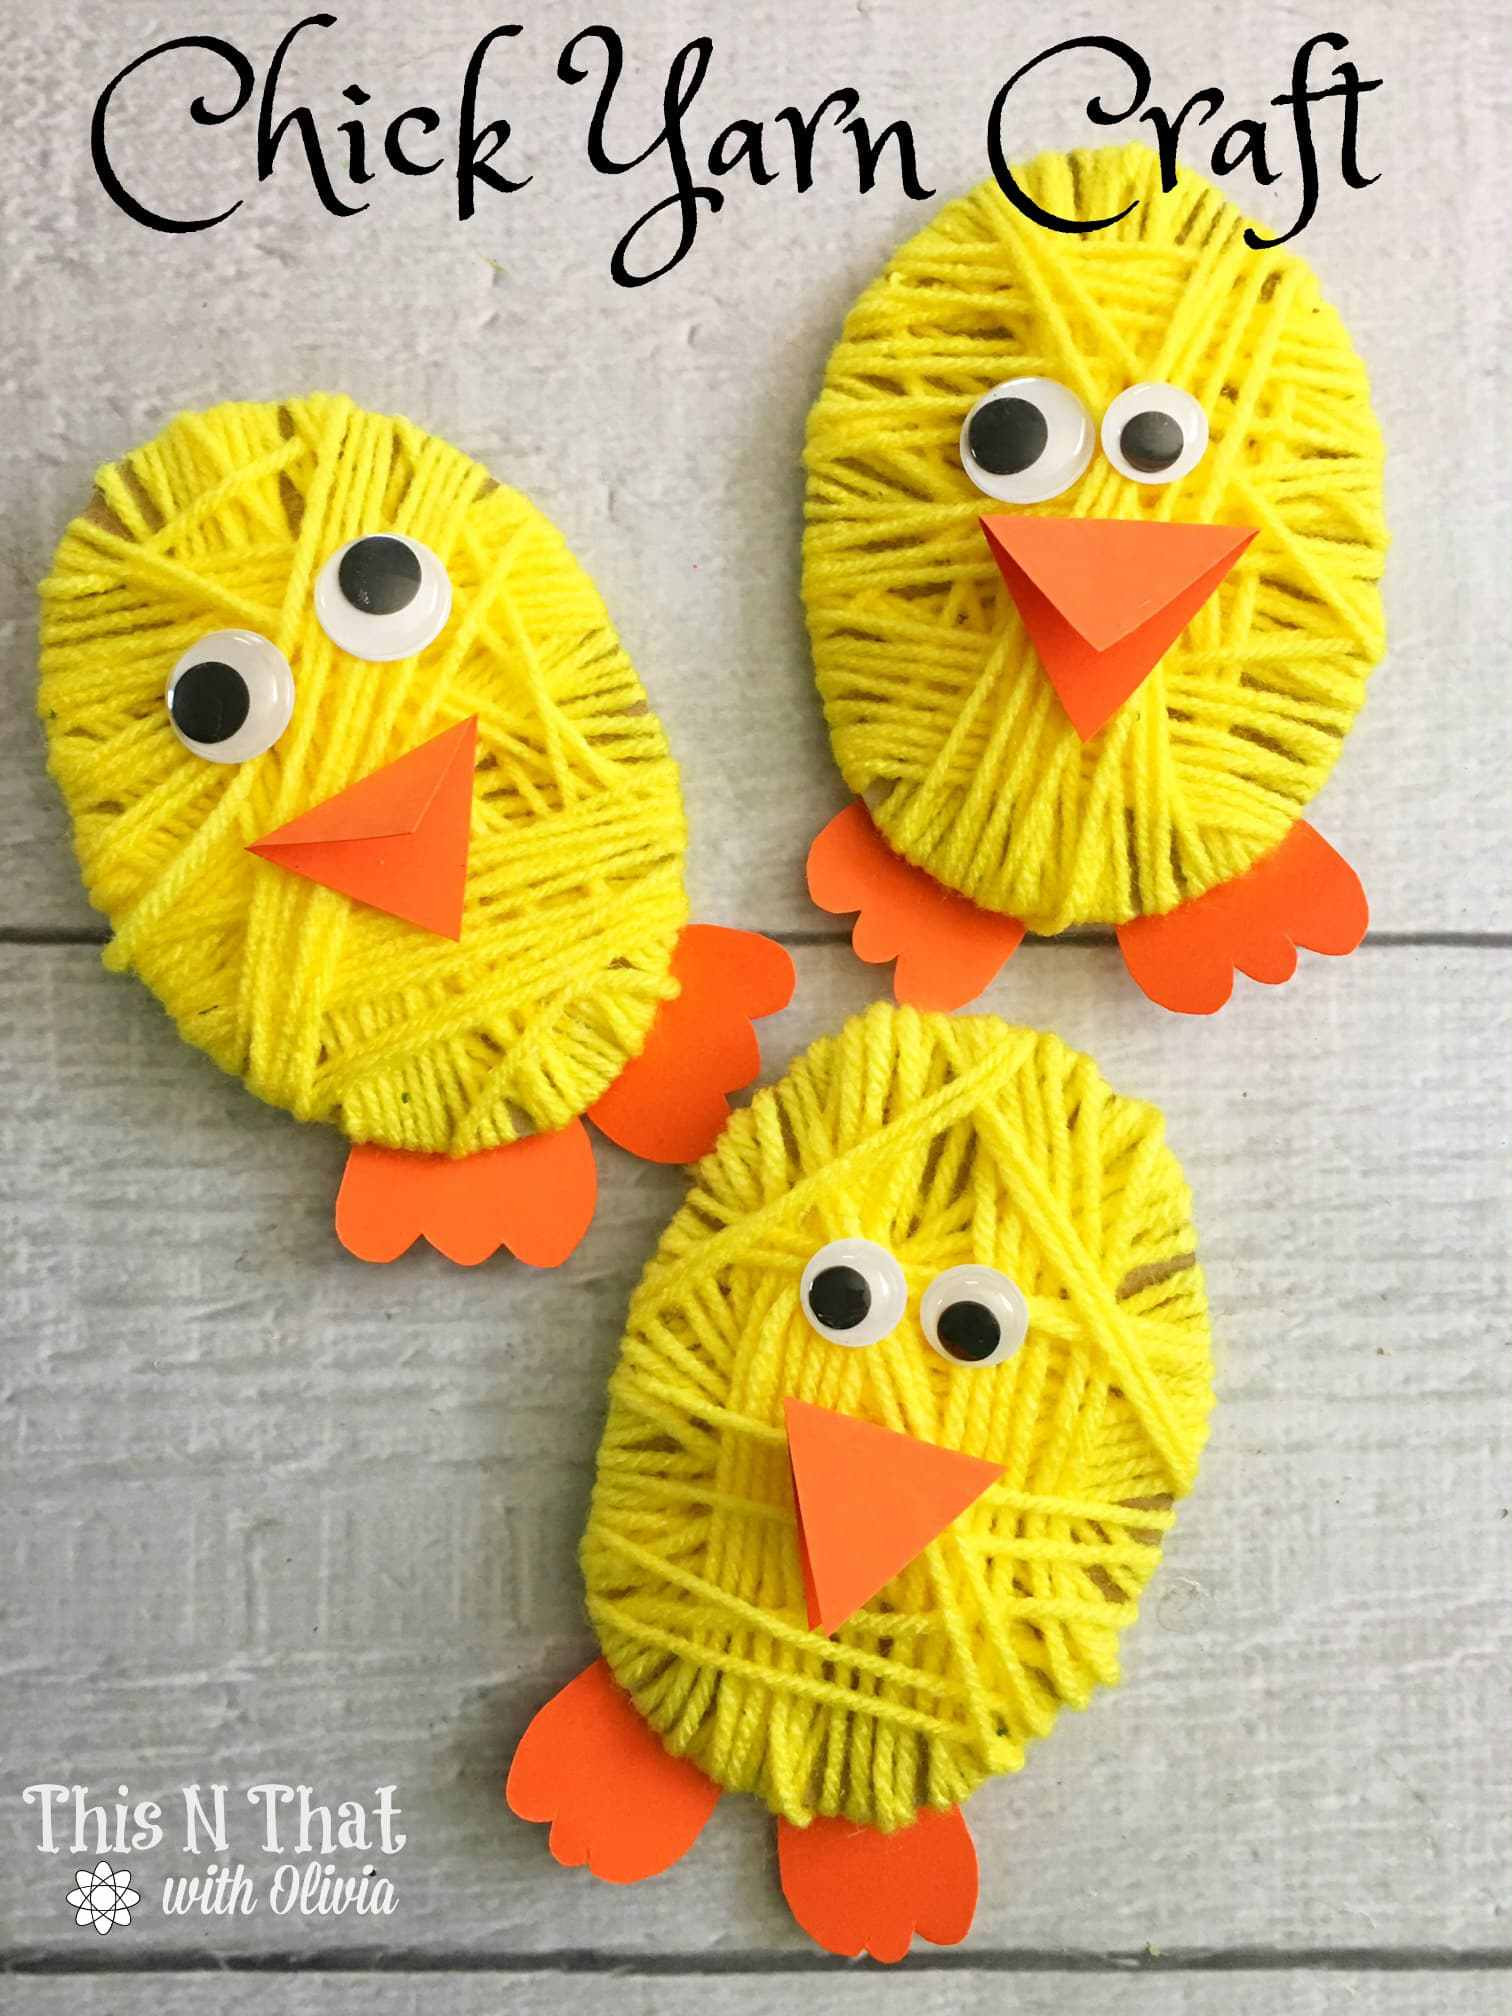 Craft Supplies For Kids
 Over 33 Easter Craft Ideas for Kids to Make Simple Cute